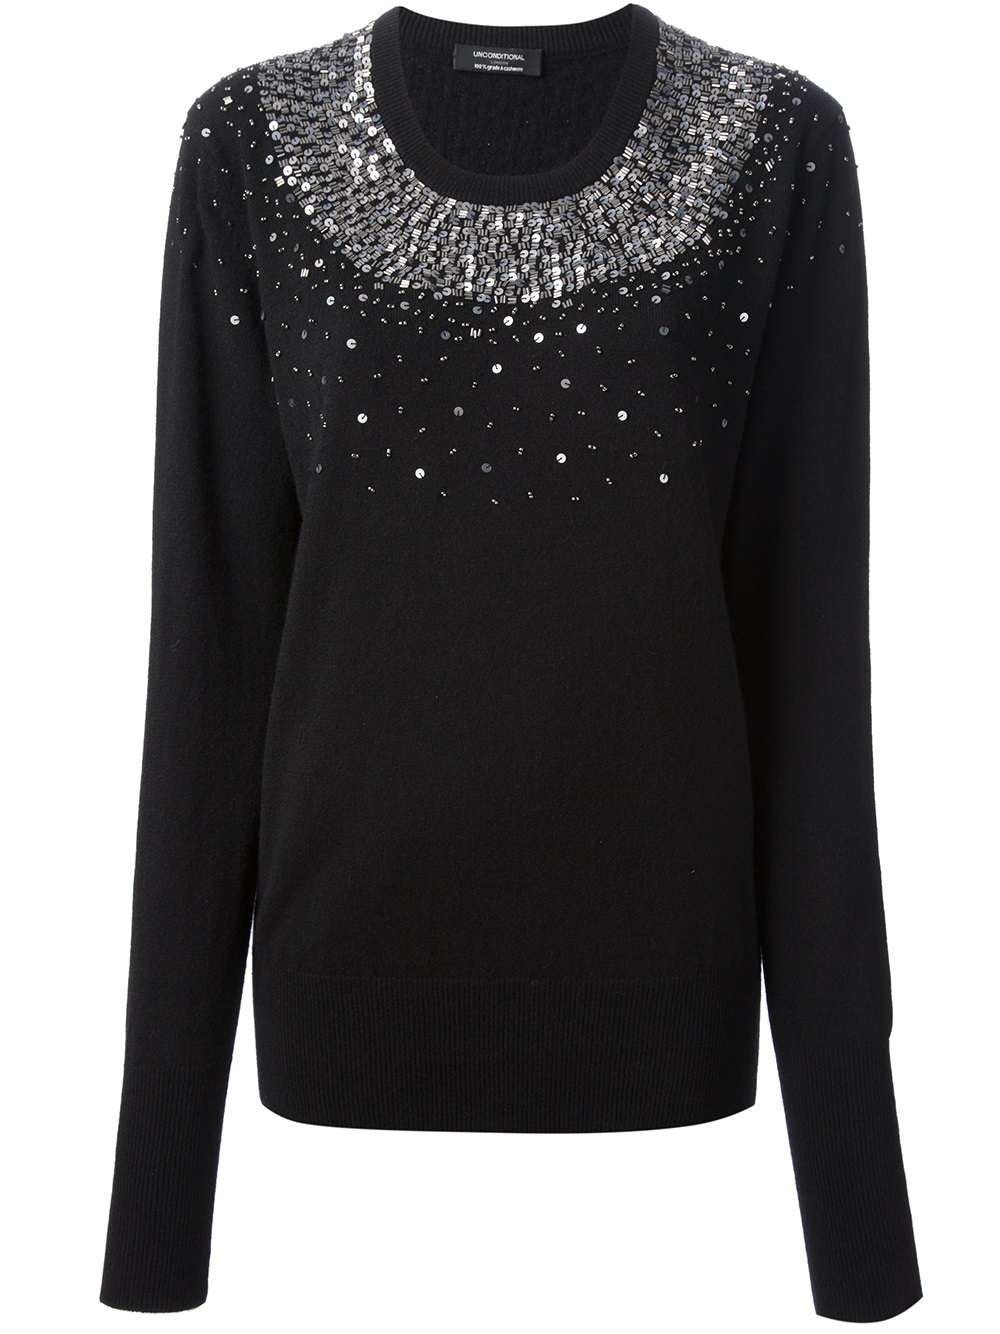 Lyst - Unconditional Beaded Sweater in Black